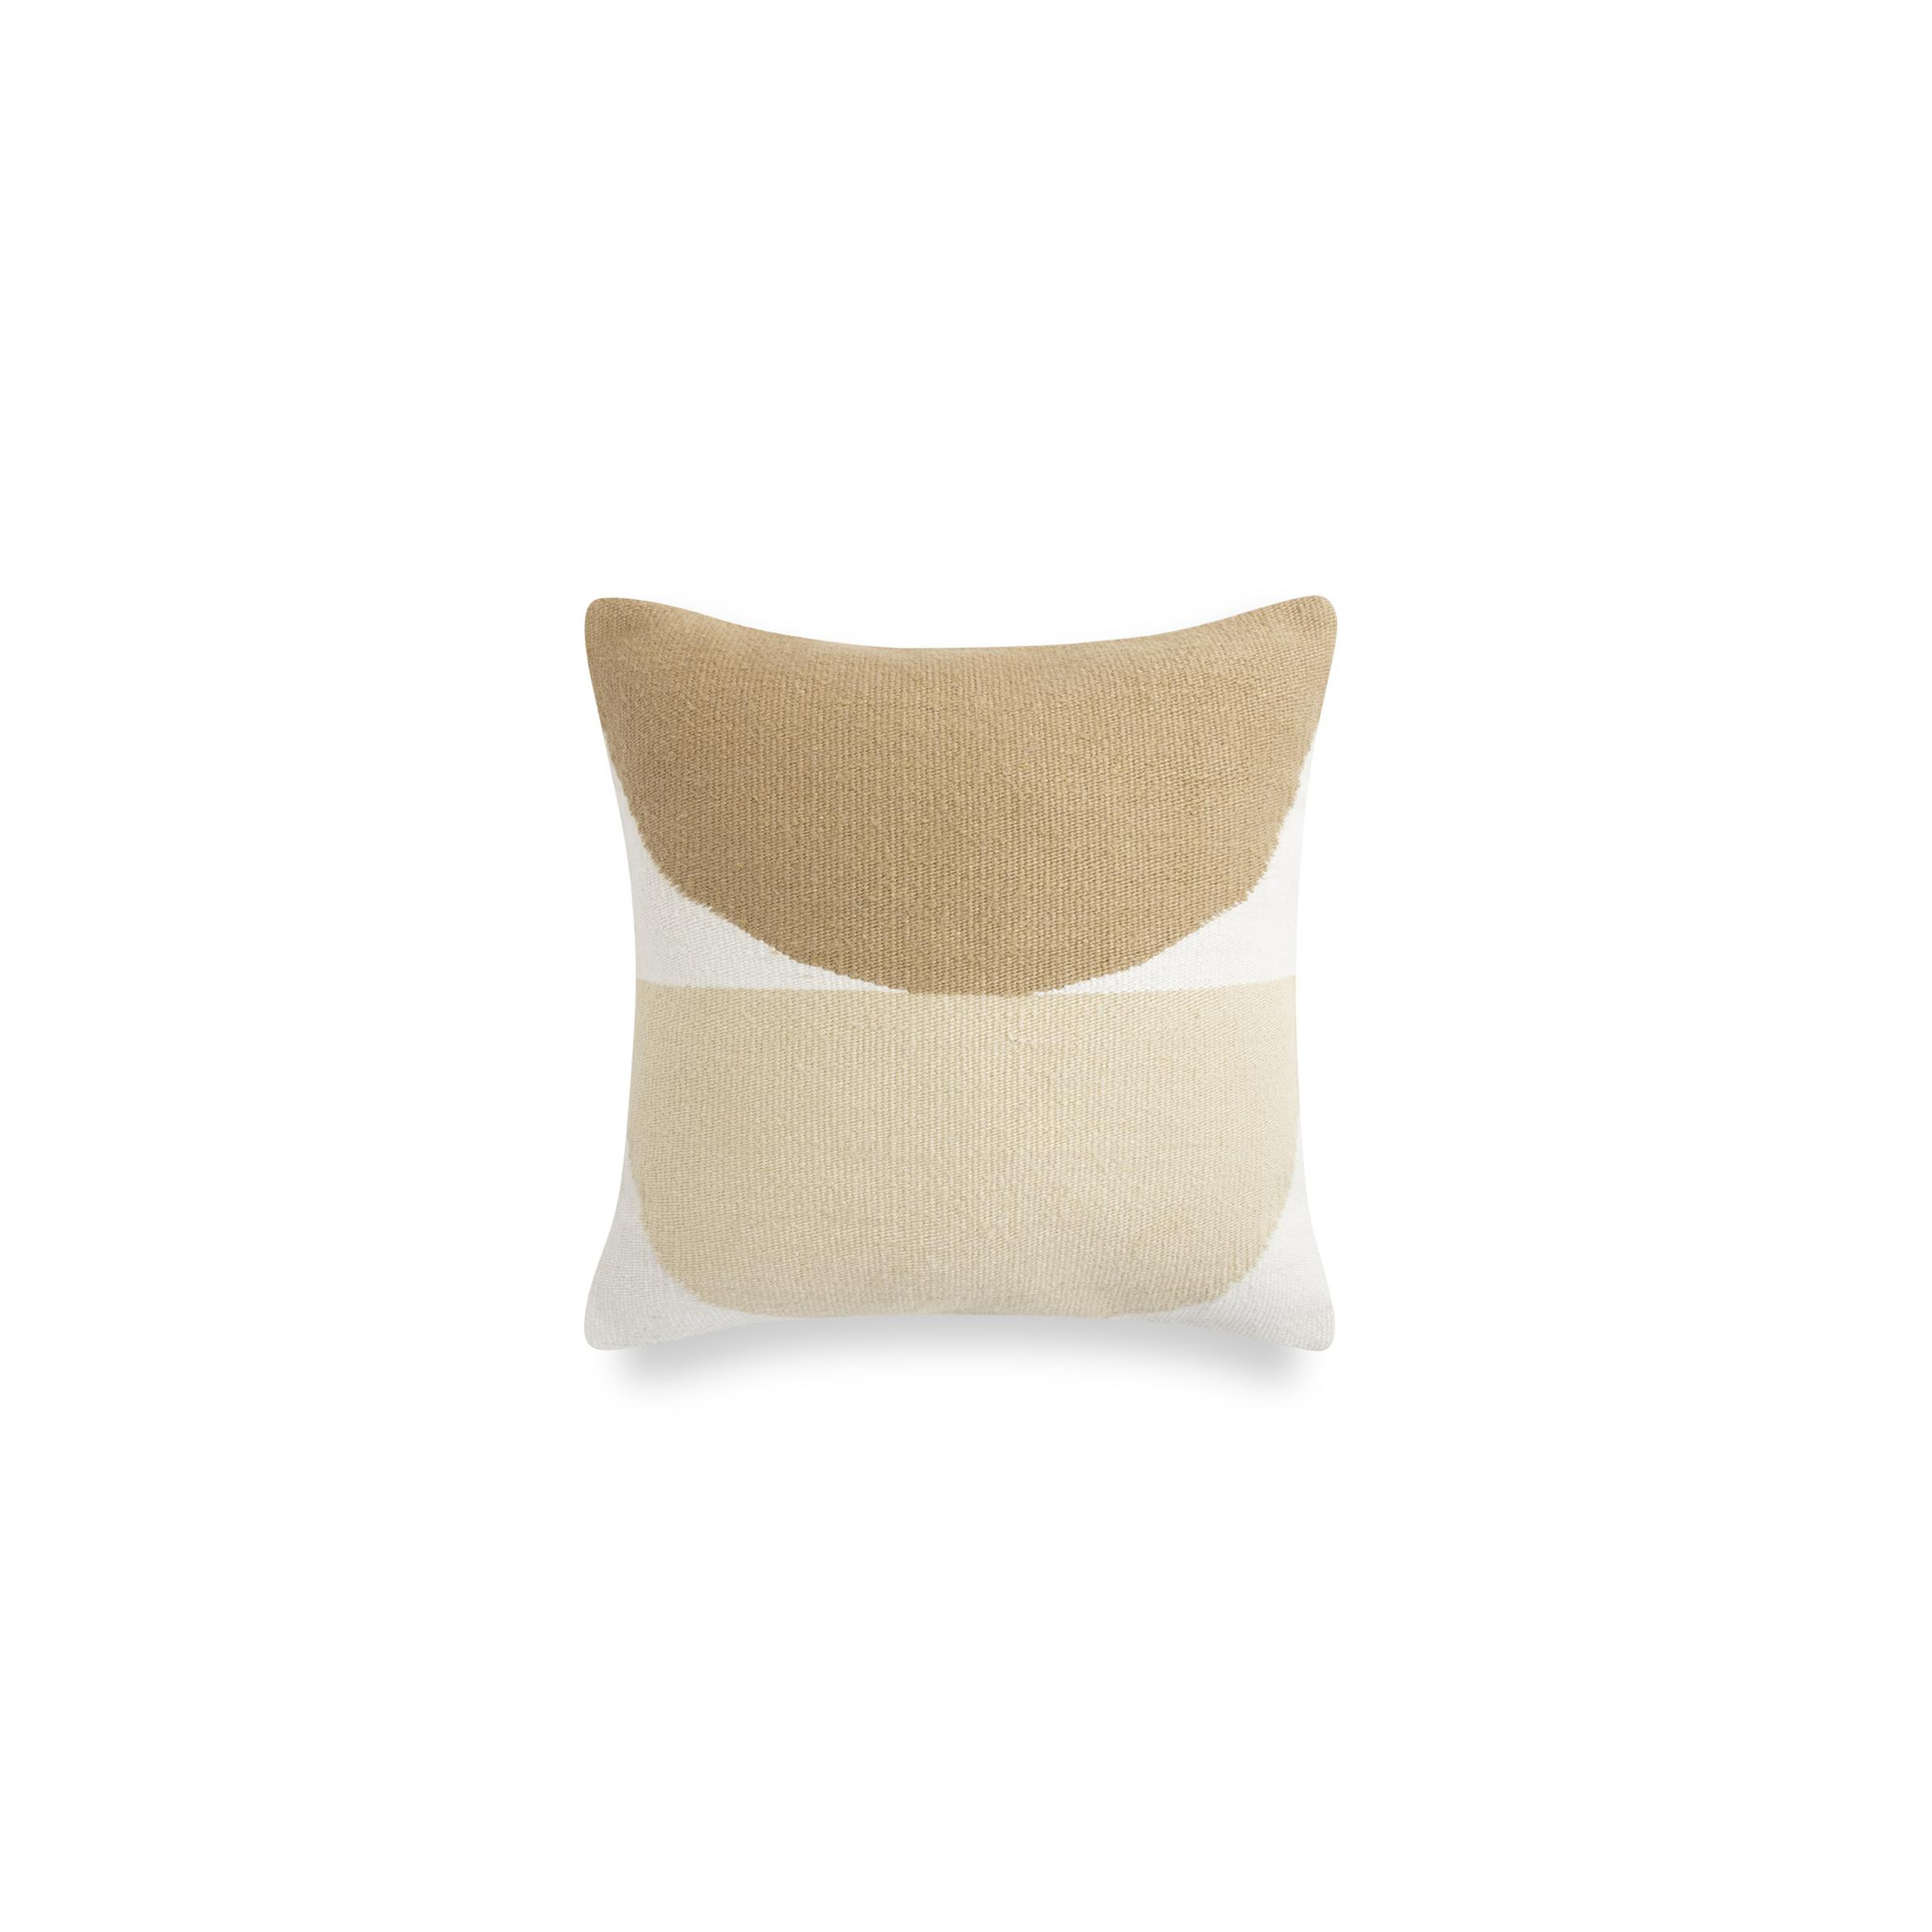 Hand-tufted Geometric Circles Pillow Cover Sand in Beige - Burrow